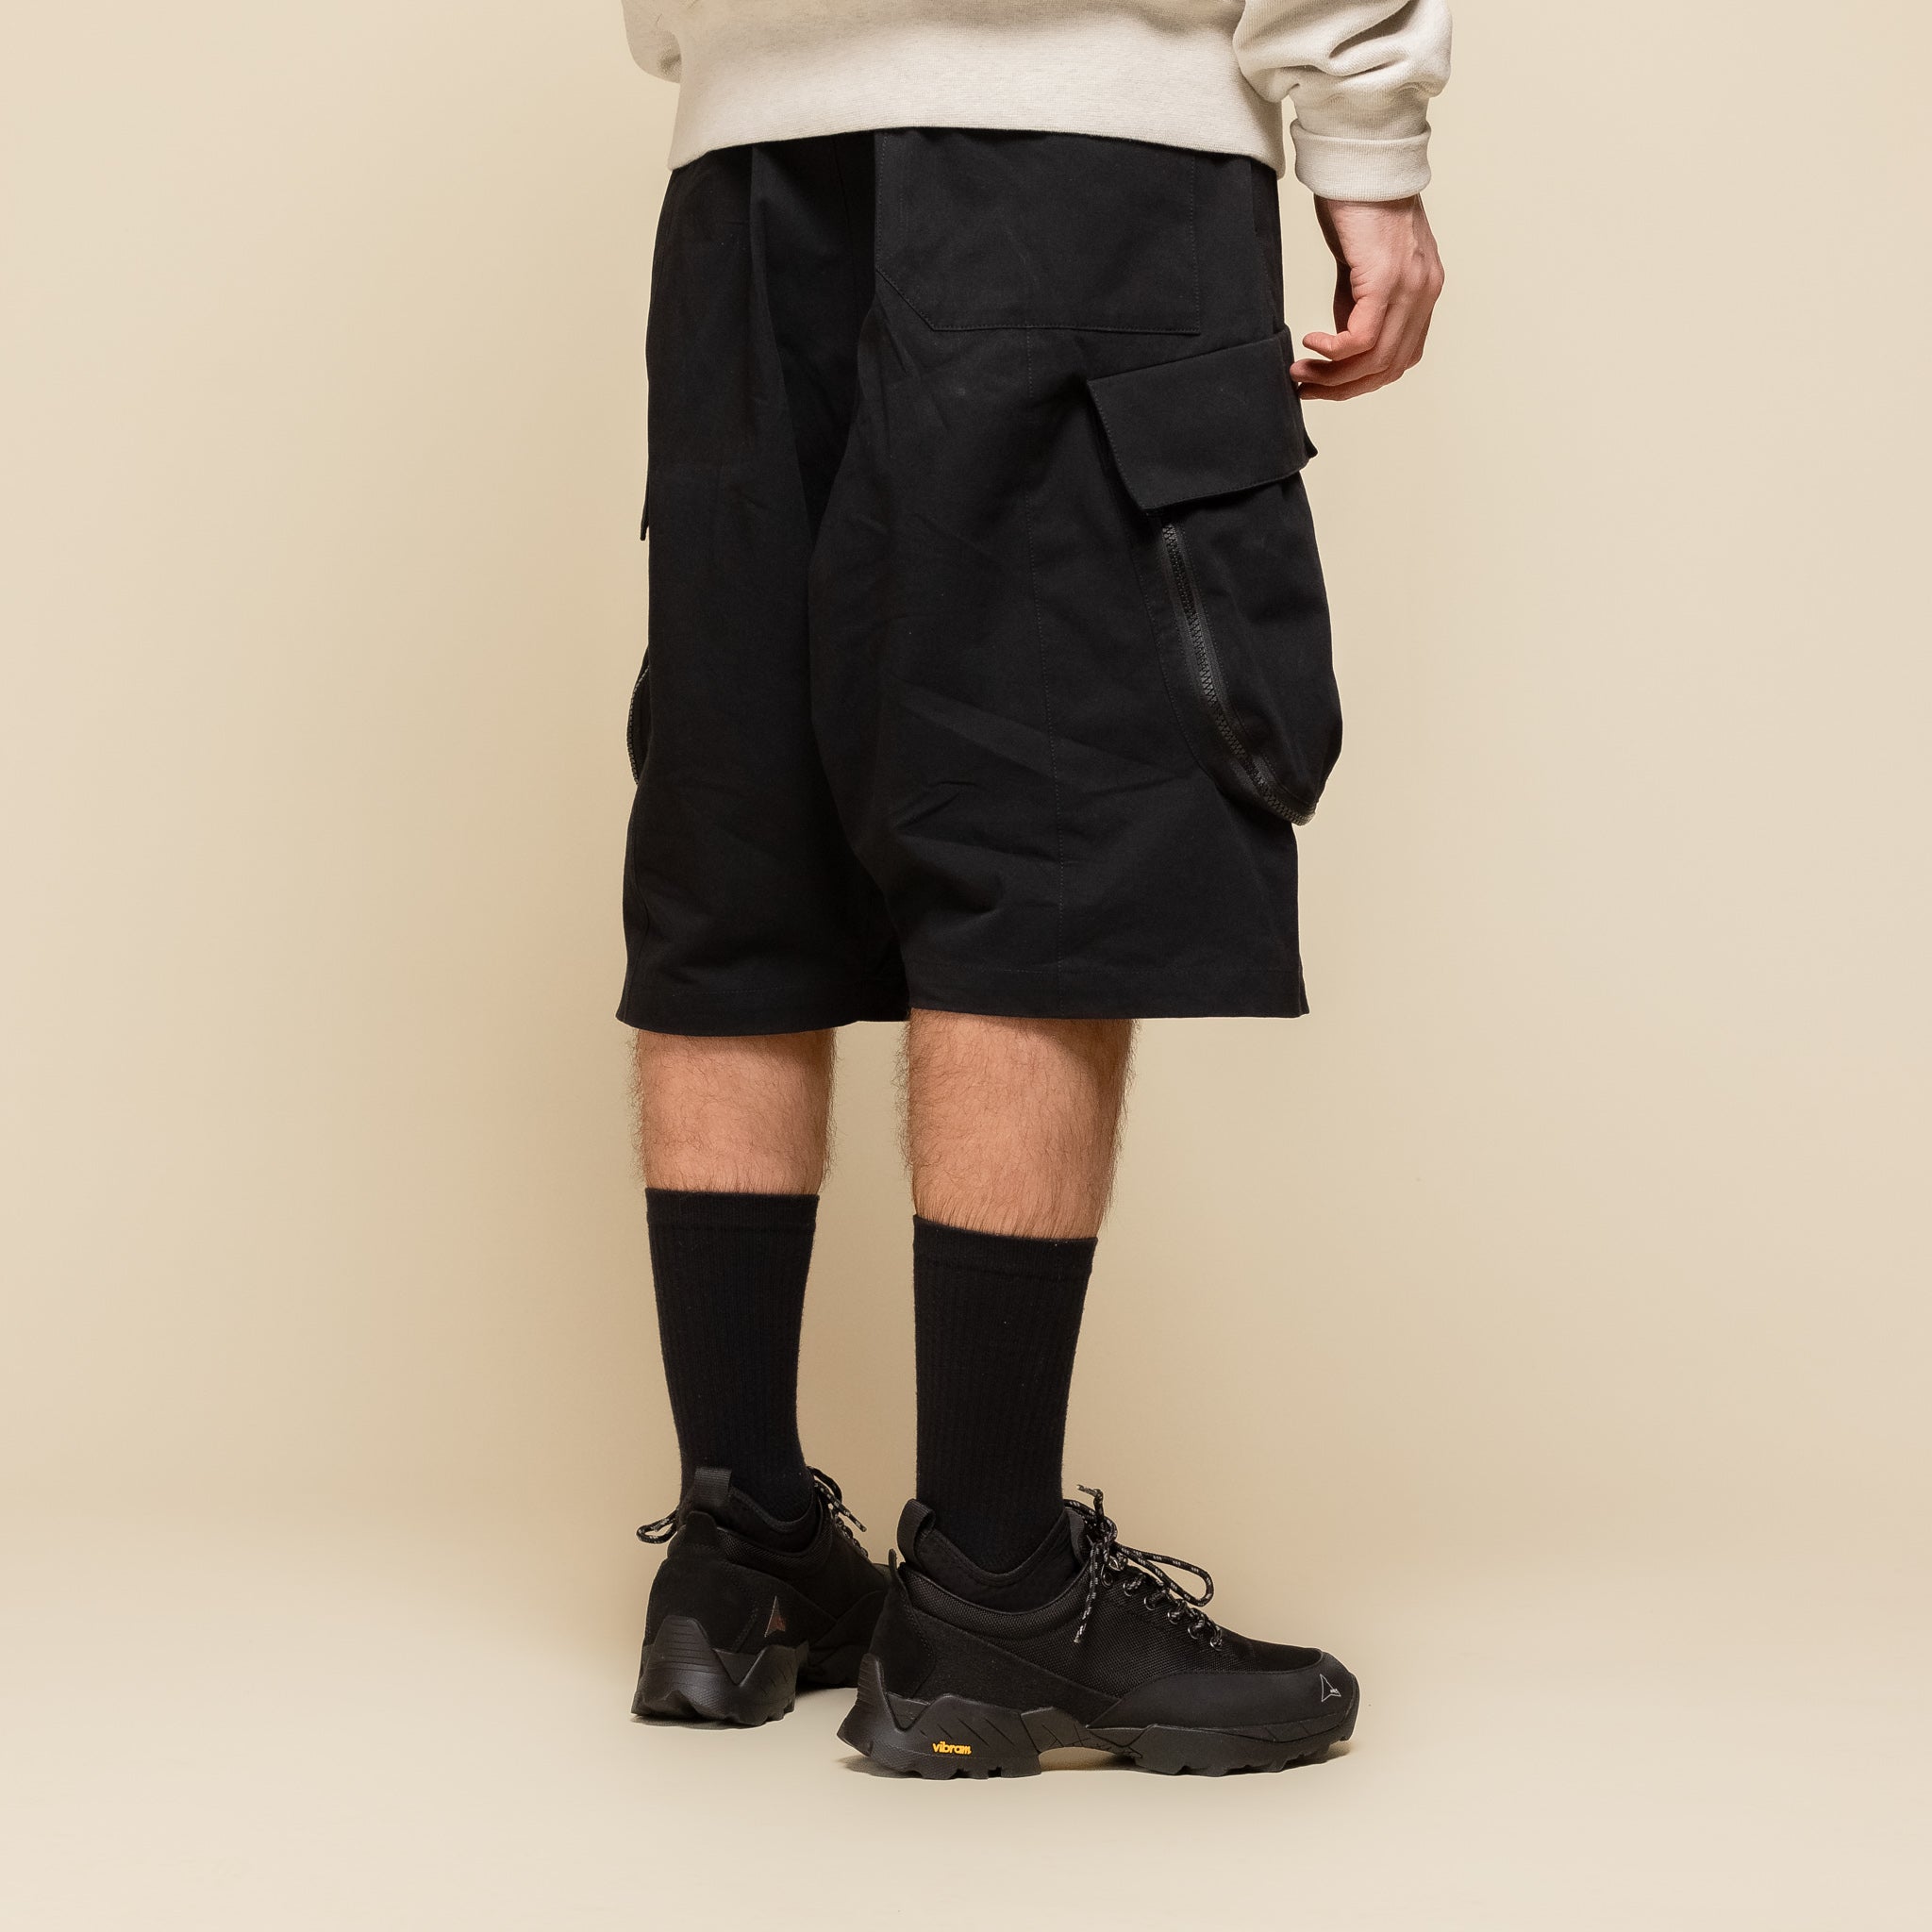 Poliquant - Jungle Shorts With Deforming Large Pockets - Black "poliquant stockists" "poliquant shorts" "poliquant website"